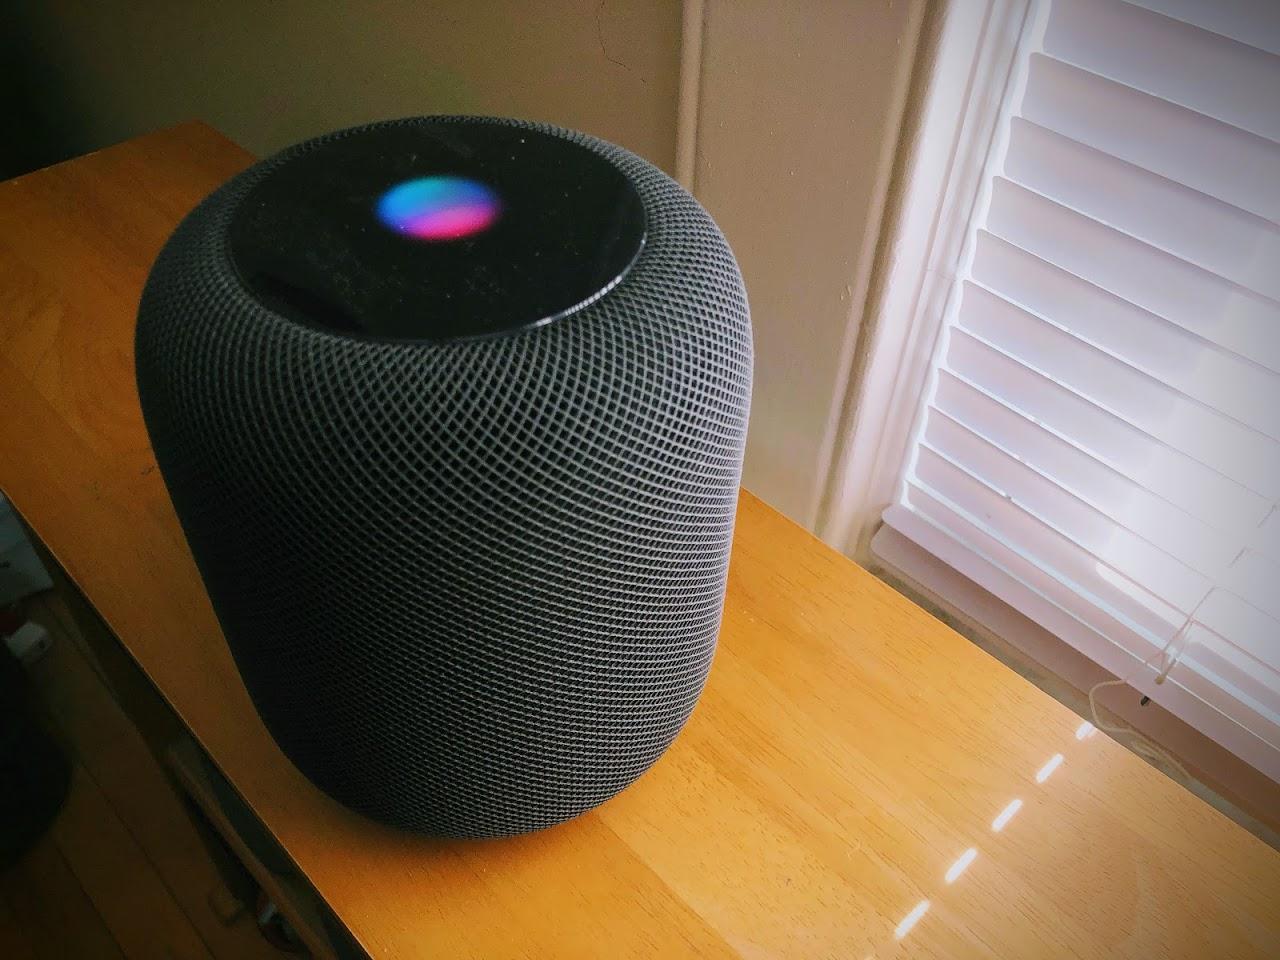 Apple’s HomePod Speaker Launches in Canada, France, and Germany on June 18th